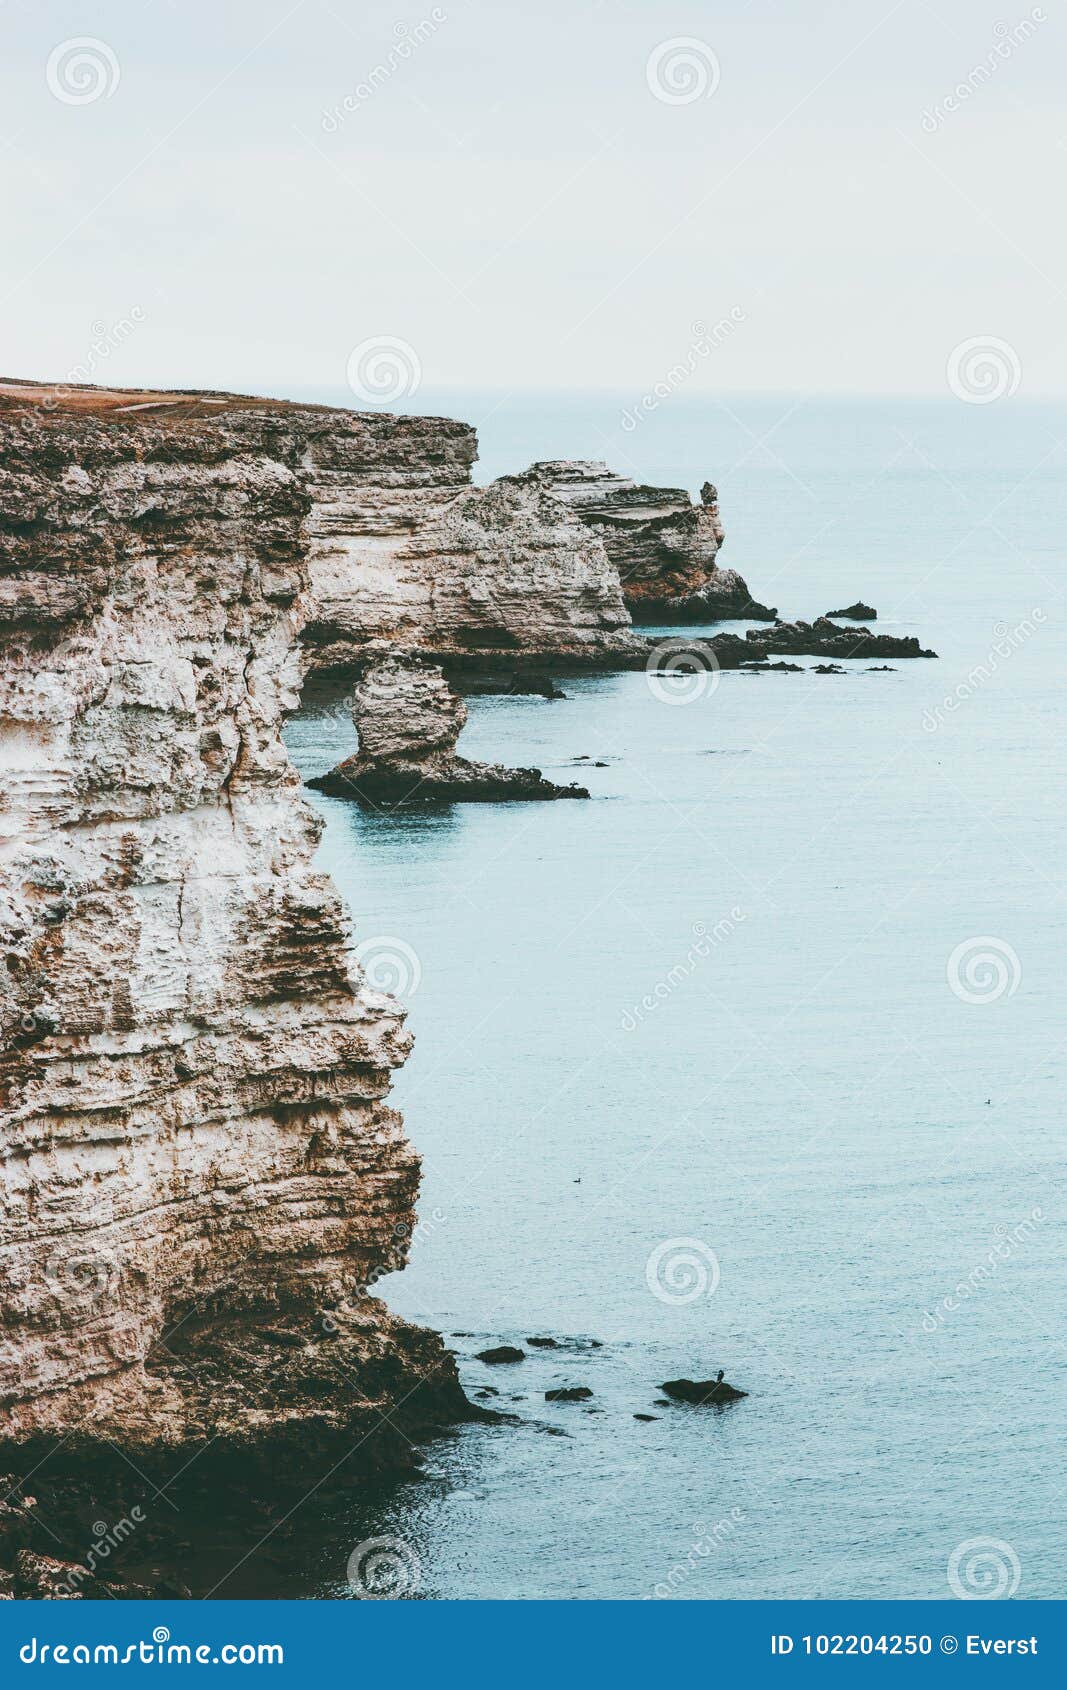 cold sea with rocky seaside landscape calm and tranquility scenic